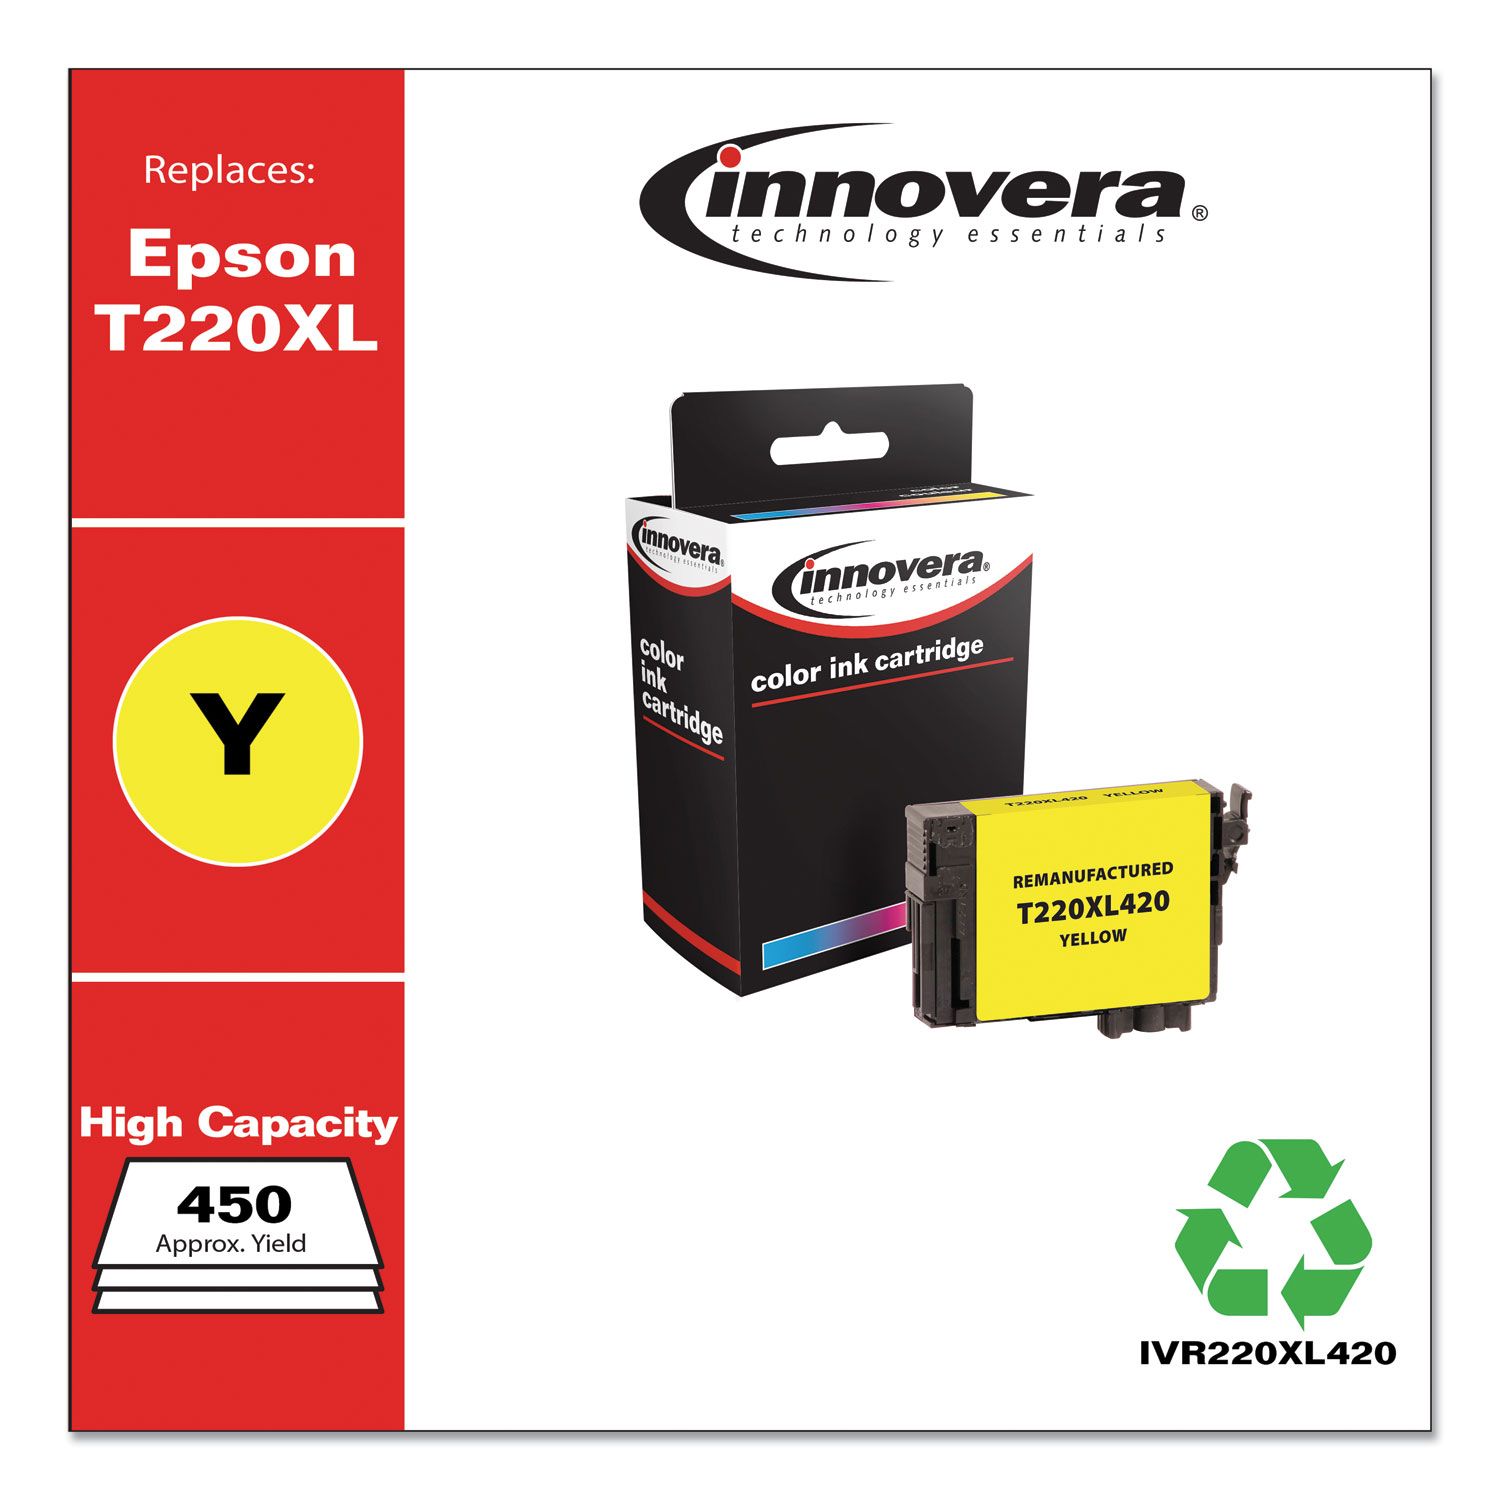  Innovera IVR220XL420 Remanufactured Yellow High-Yield Ink, Replacement for Epson T220XL (T220XL420), 450 Page-Yield (IVR220XL420) 